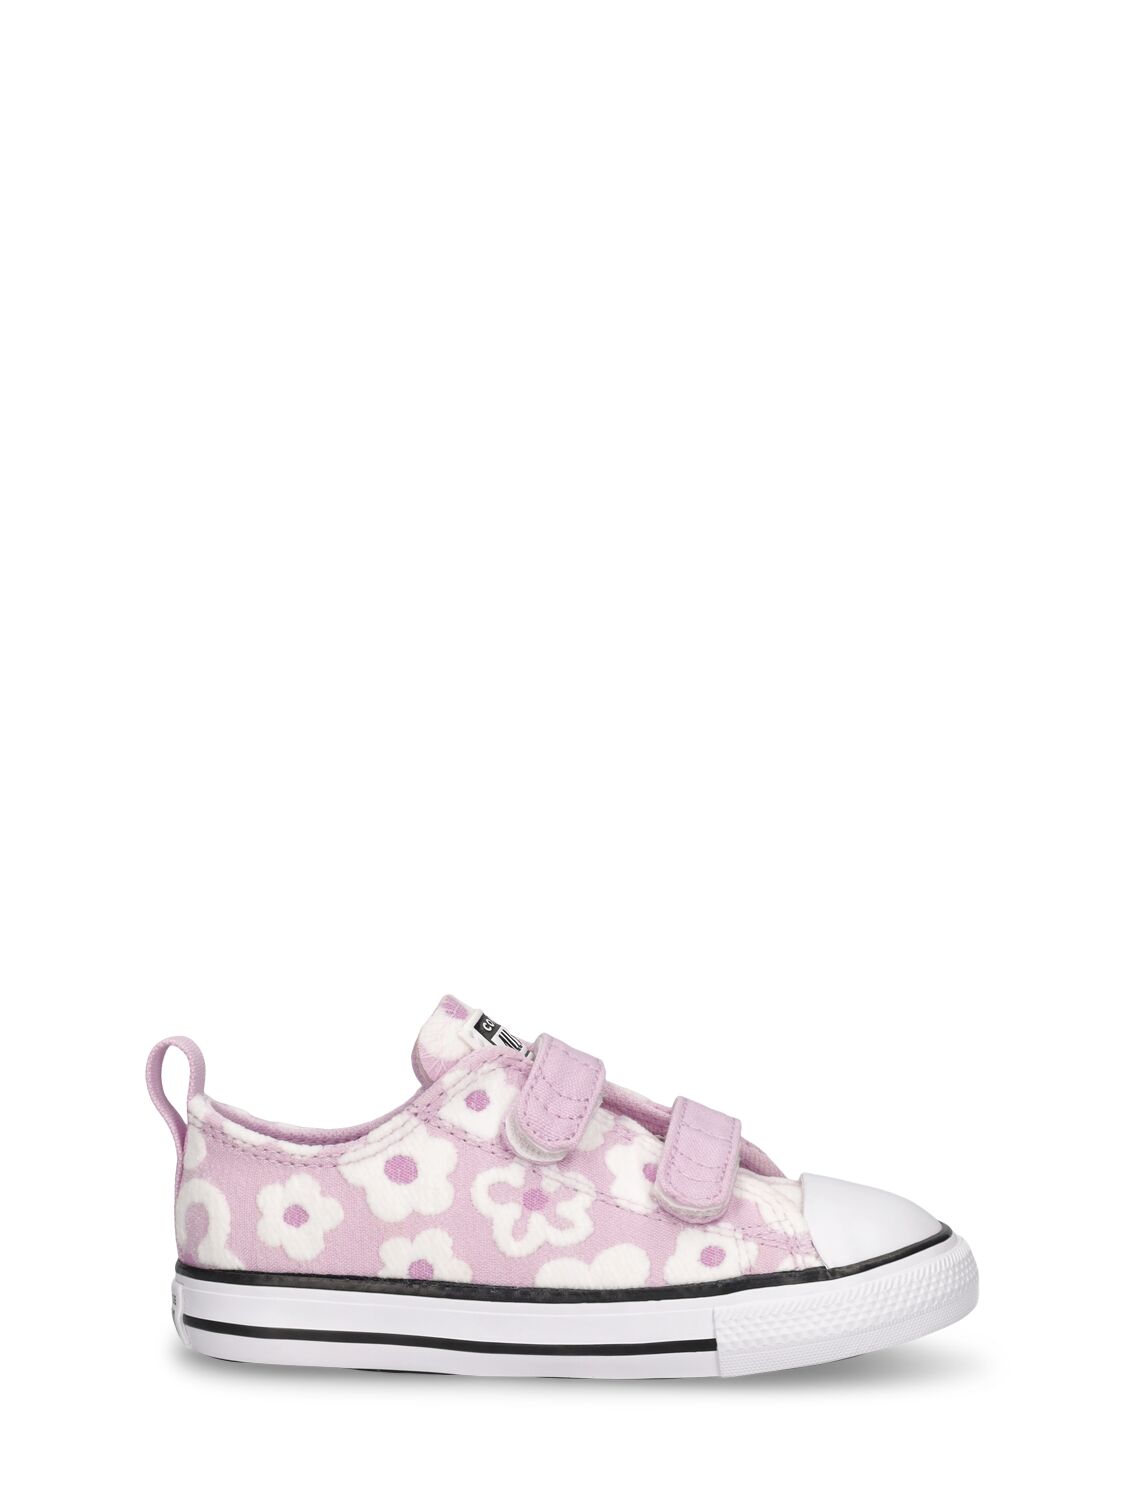 Image of Embroidered Flower Canvas Strap Sneakers